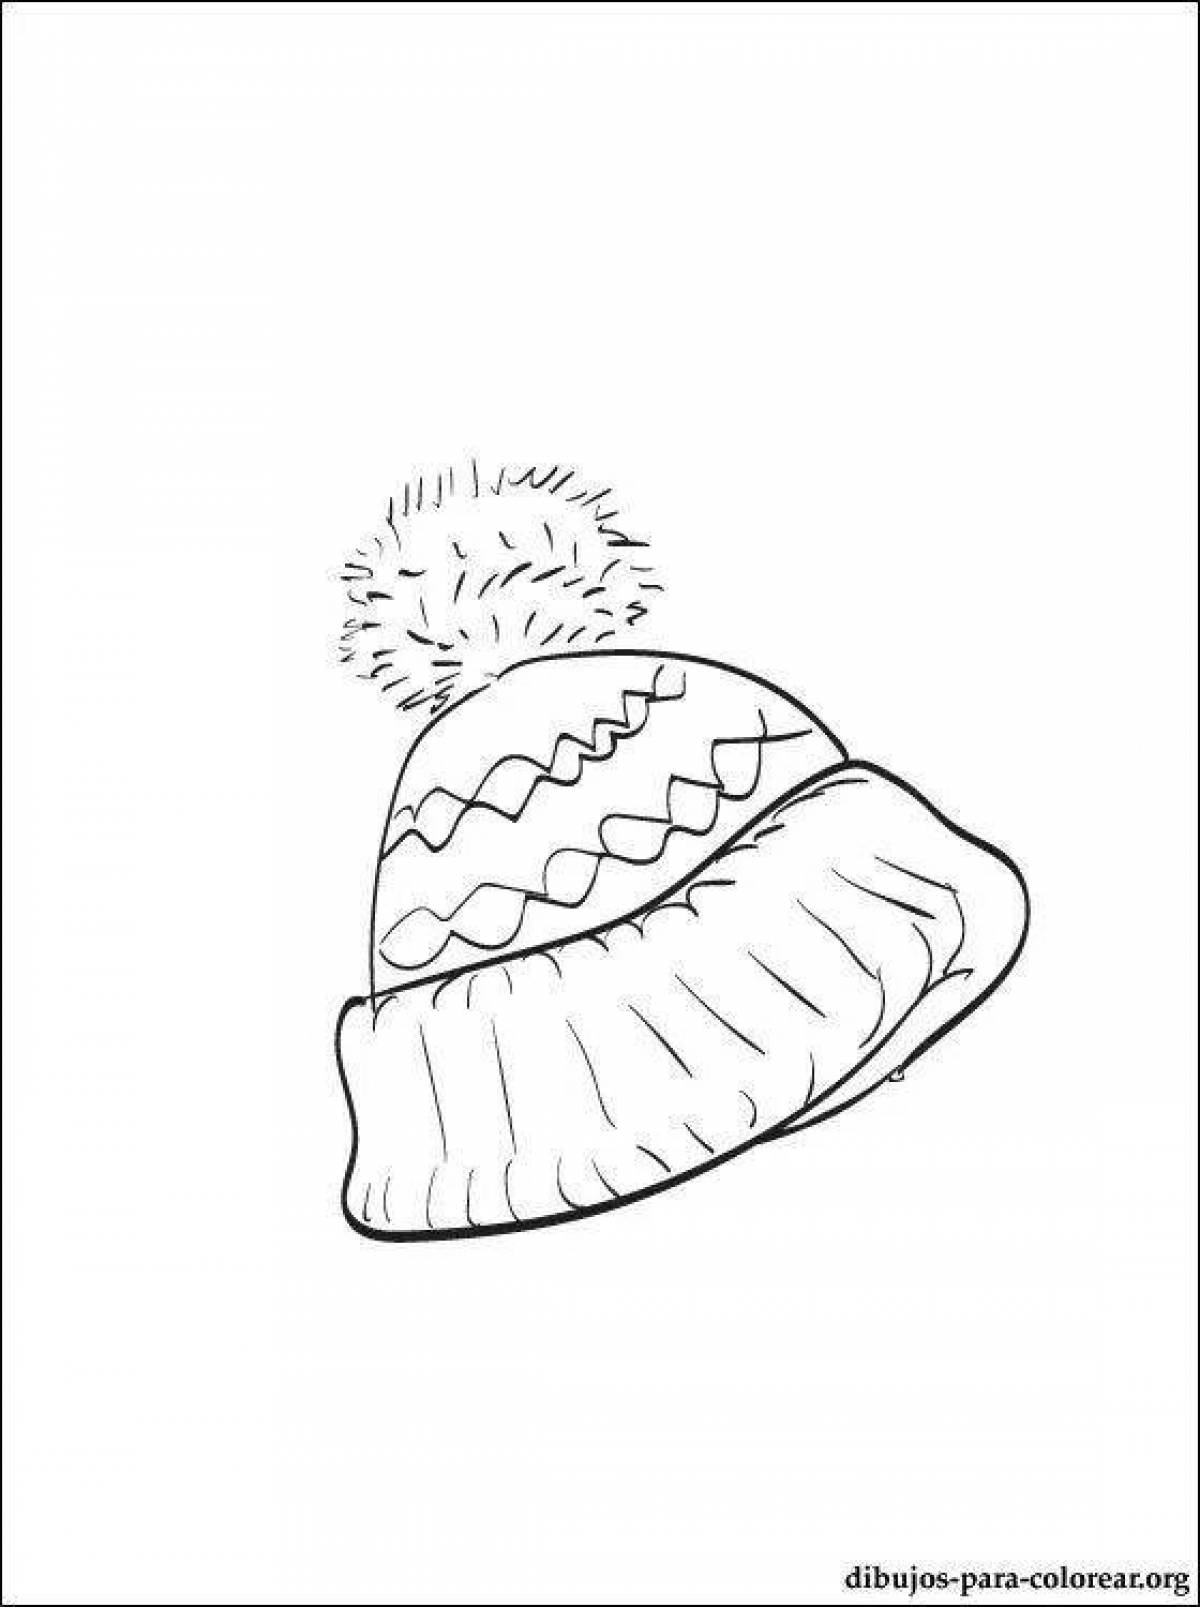 Charming winter hat coloring book